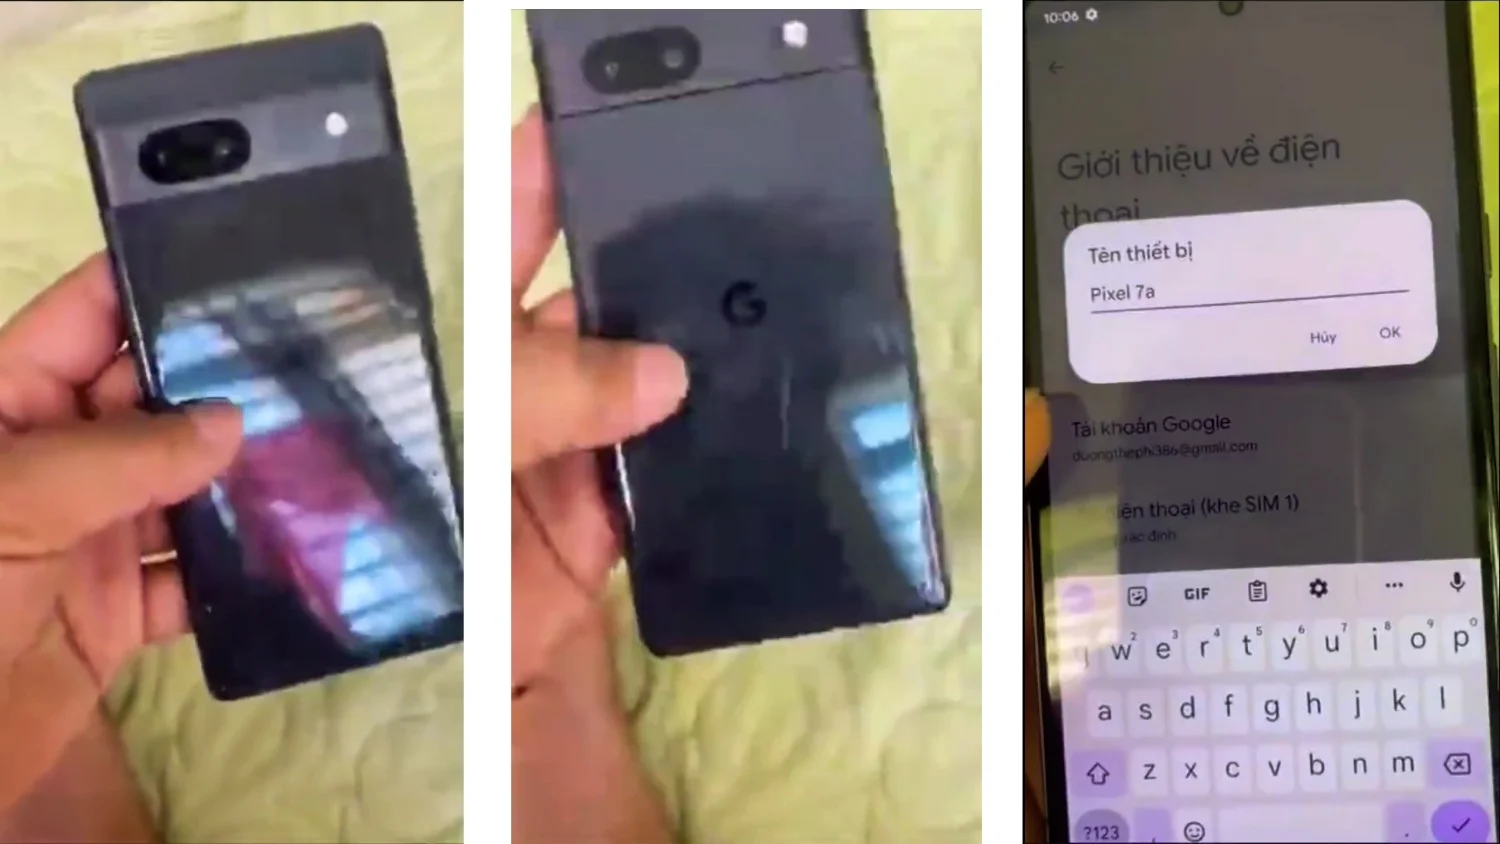 Collage of three images showing a user holding an alleged Google Pixel 7a pre-production phone.